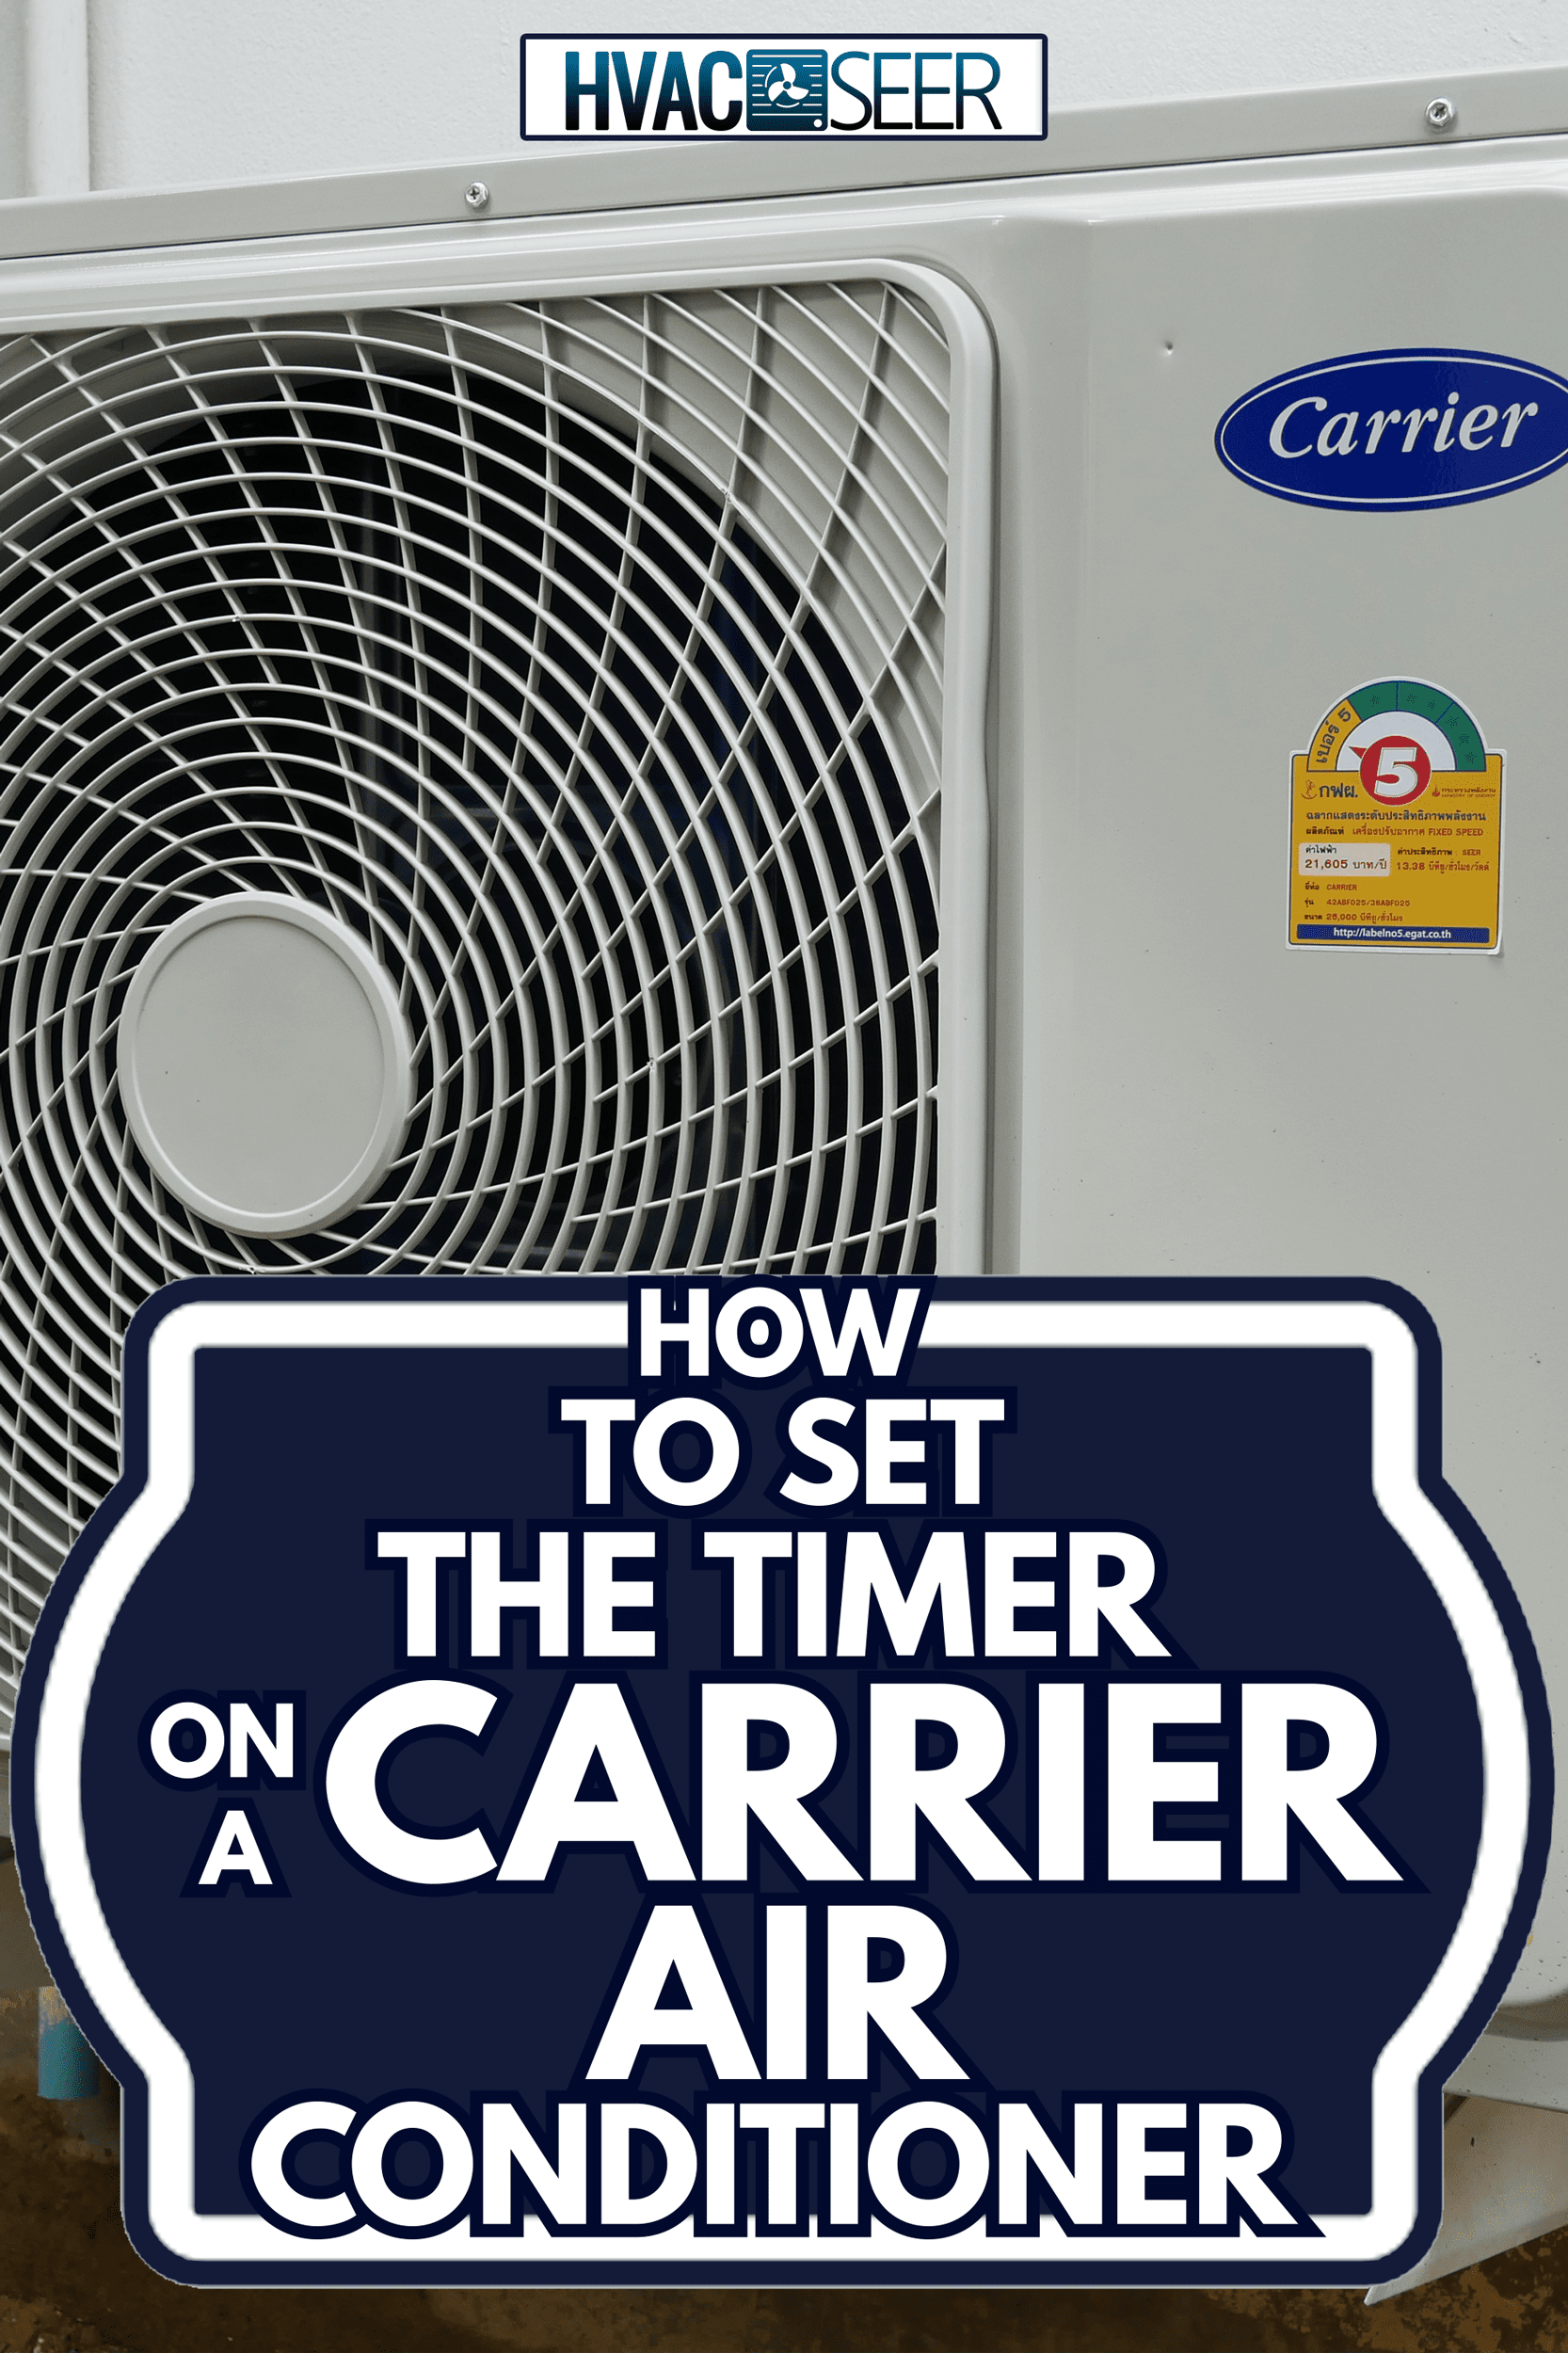 Carrier Air conditioner unit at office - How To Set The Timer On A Carrier Air Conditioner